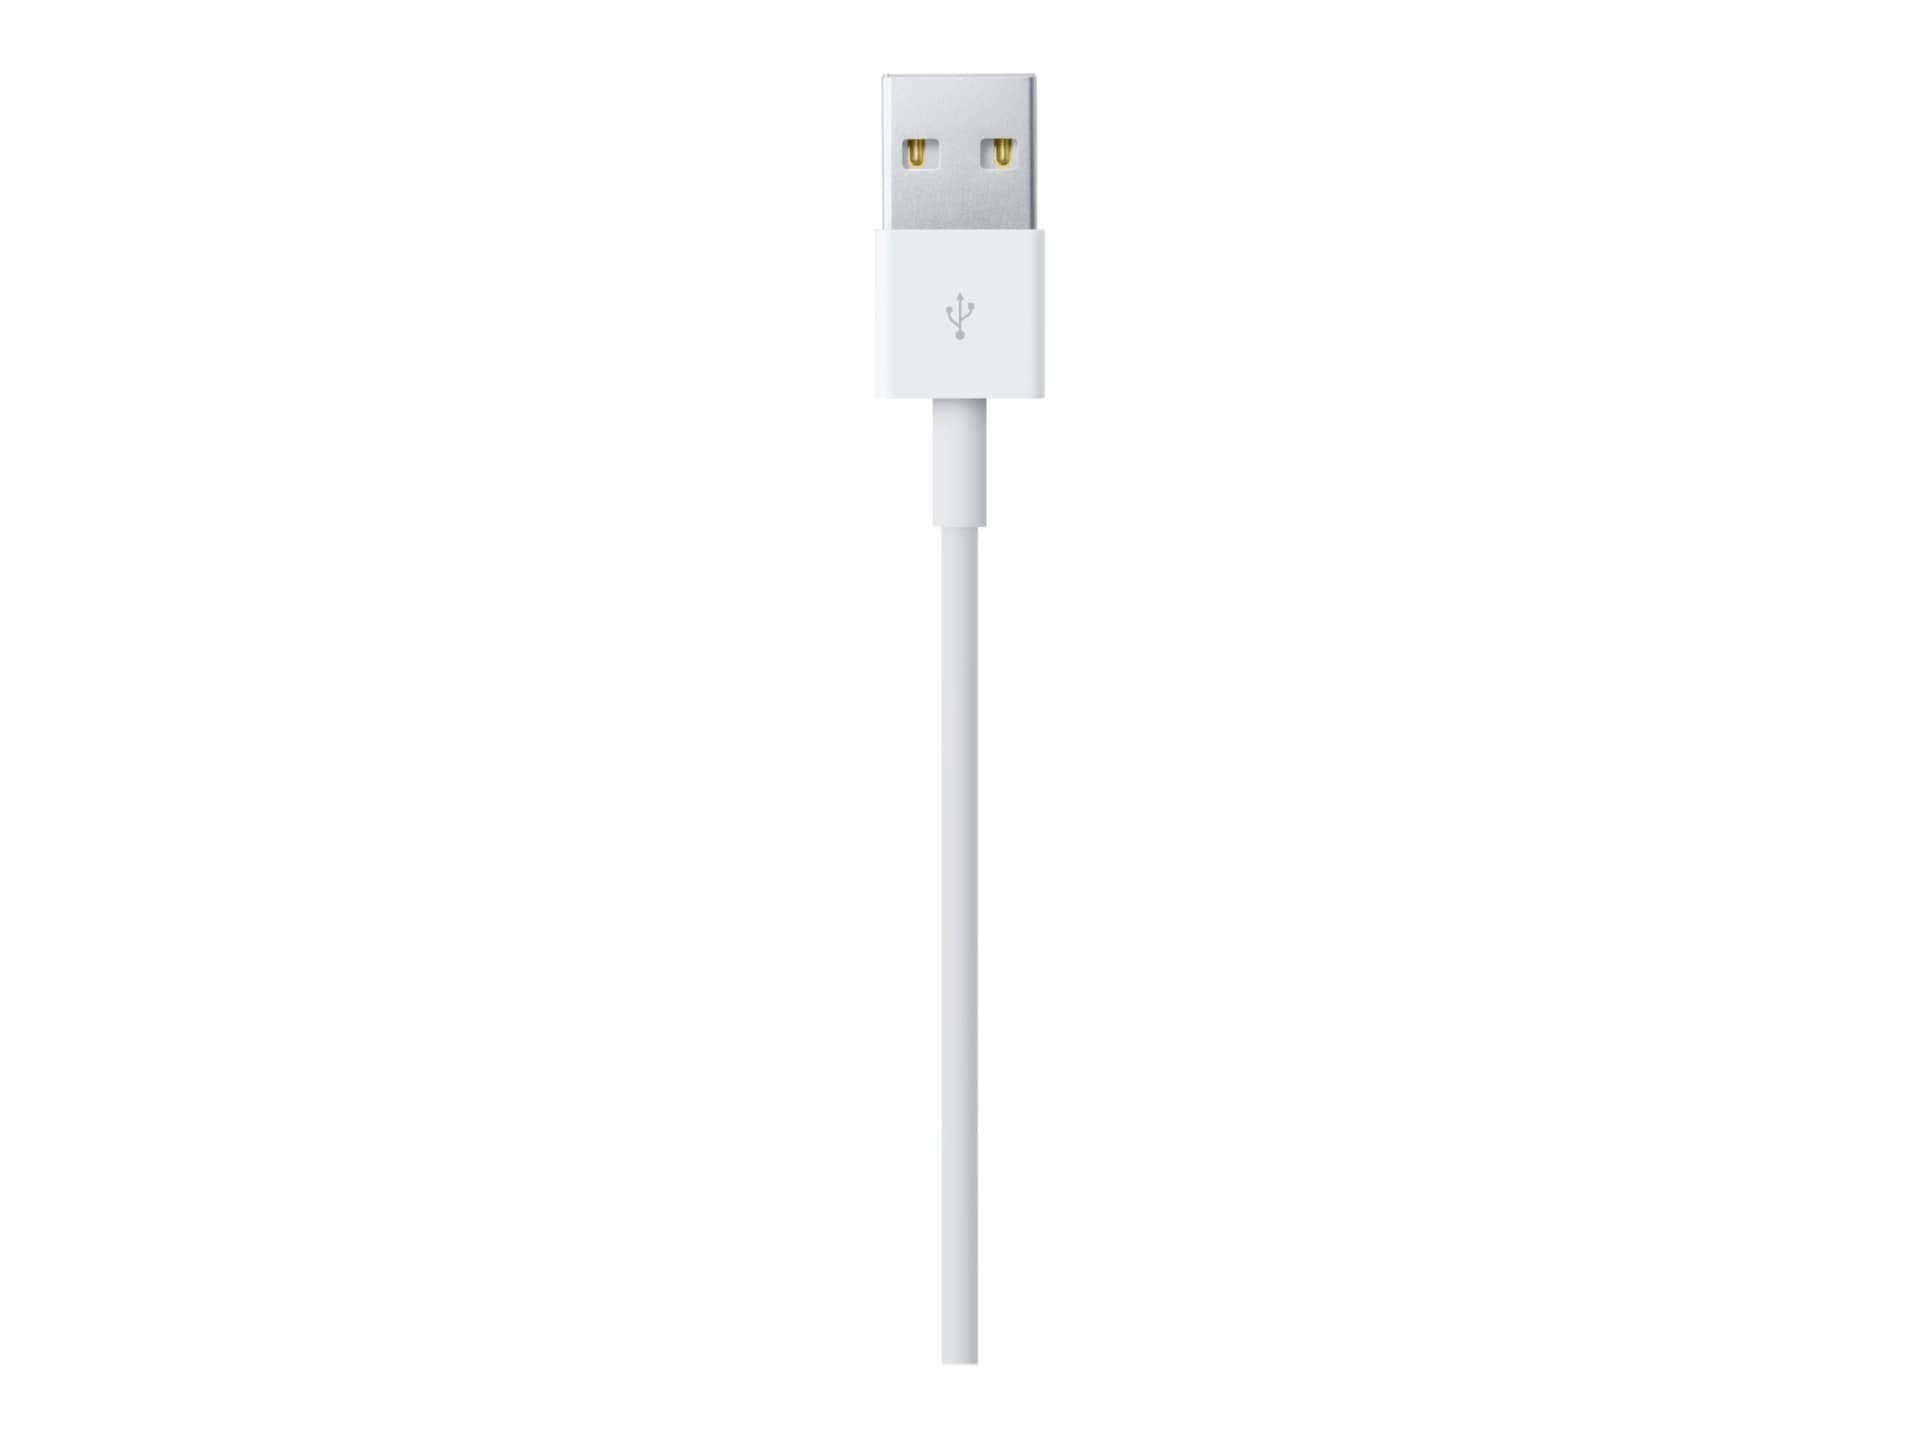 USB-Lightning cable for data and charging